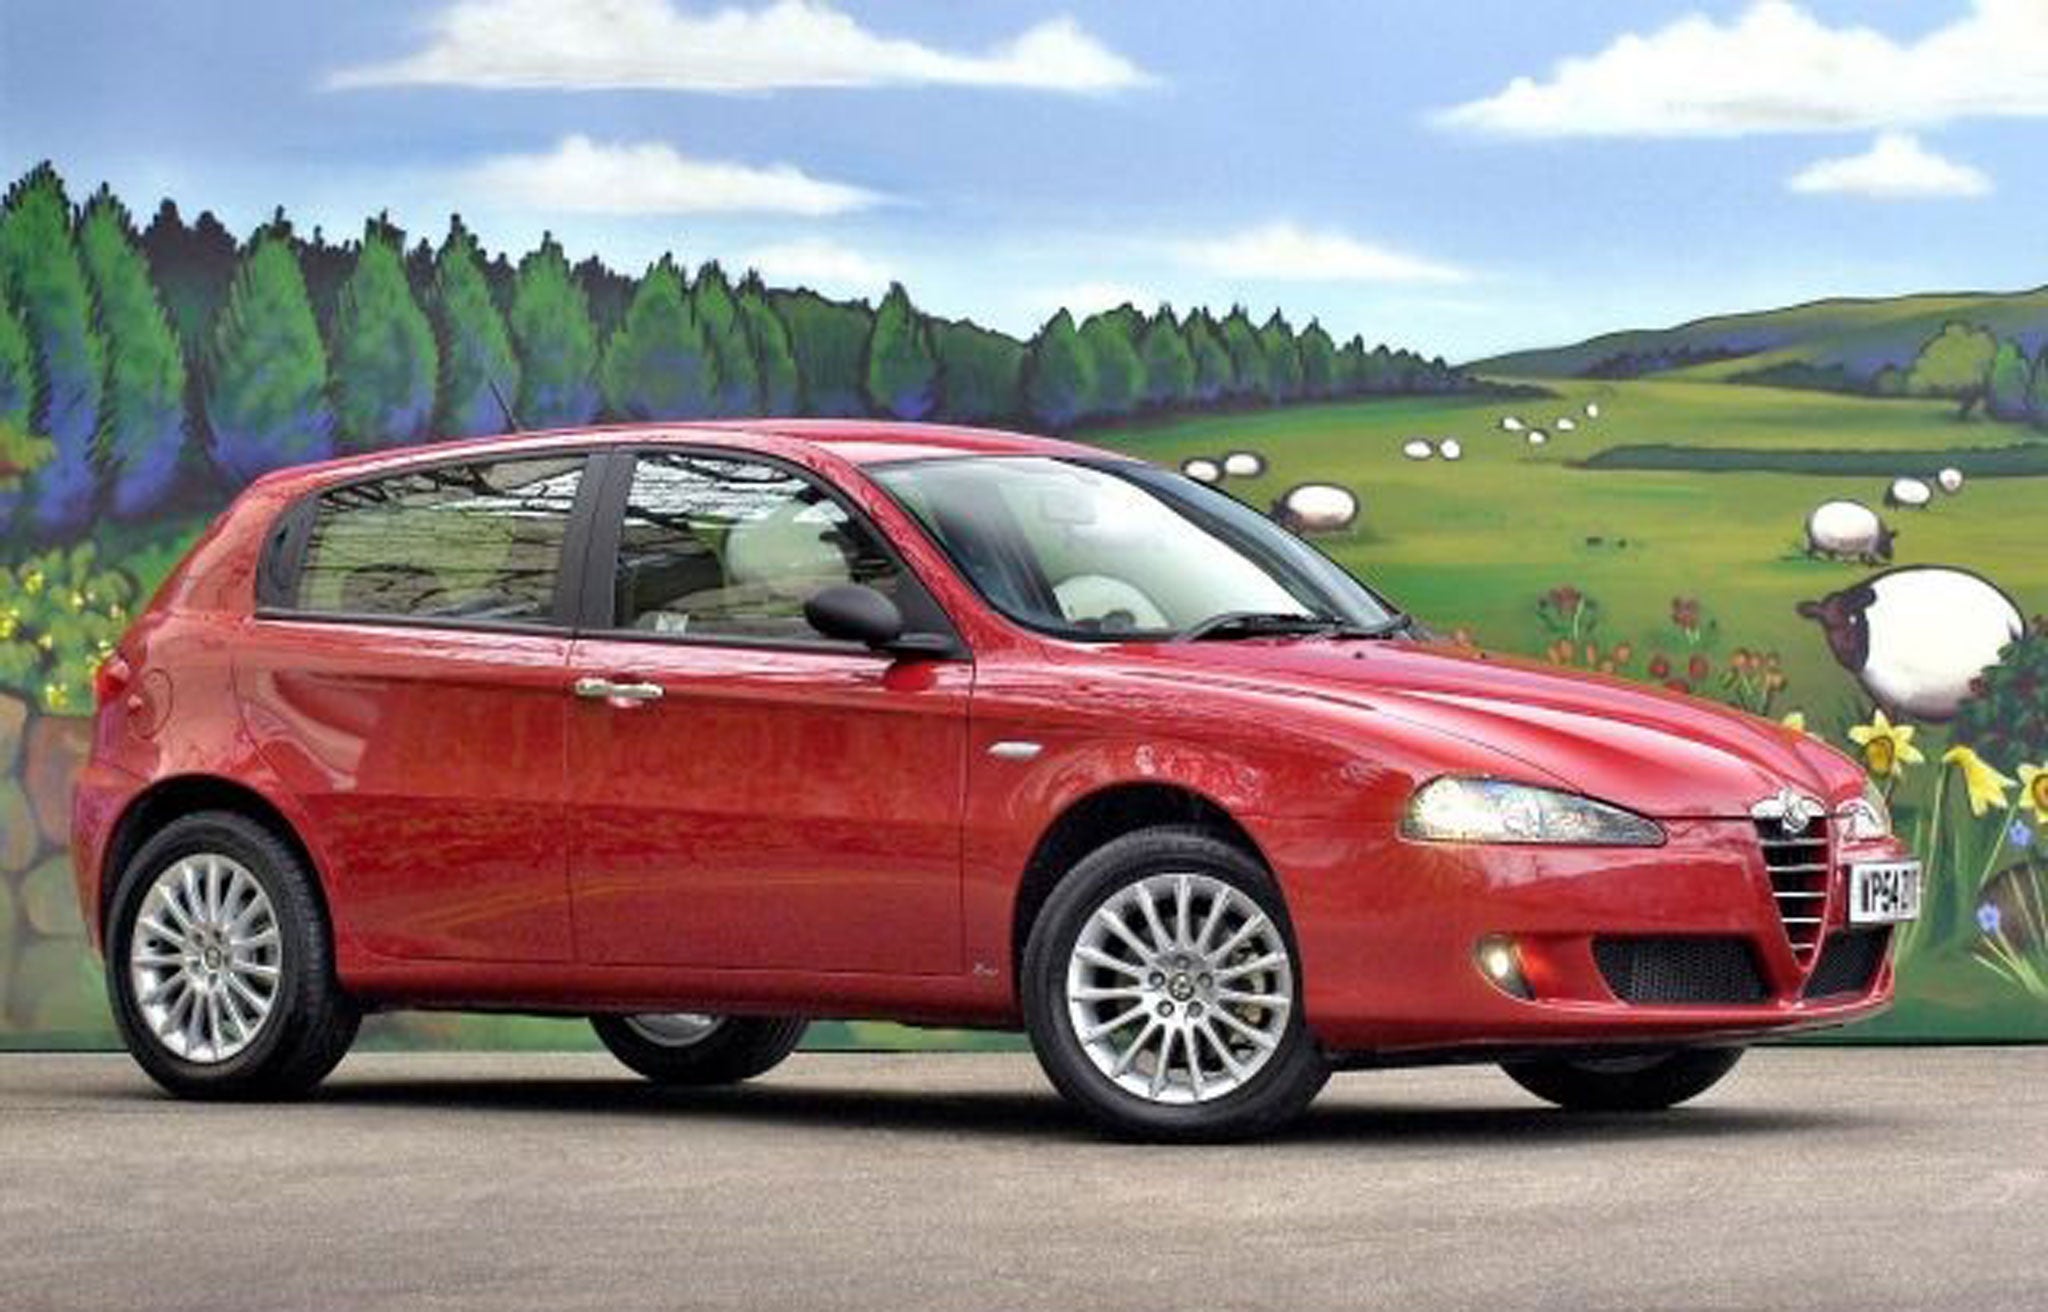 The Alfa Romeo 147 was the best model the company had made for decades, with great styling, engines and specifications